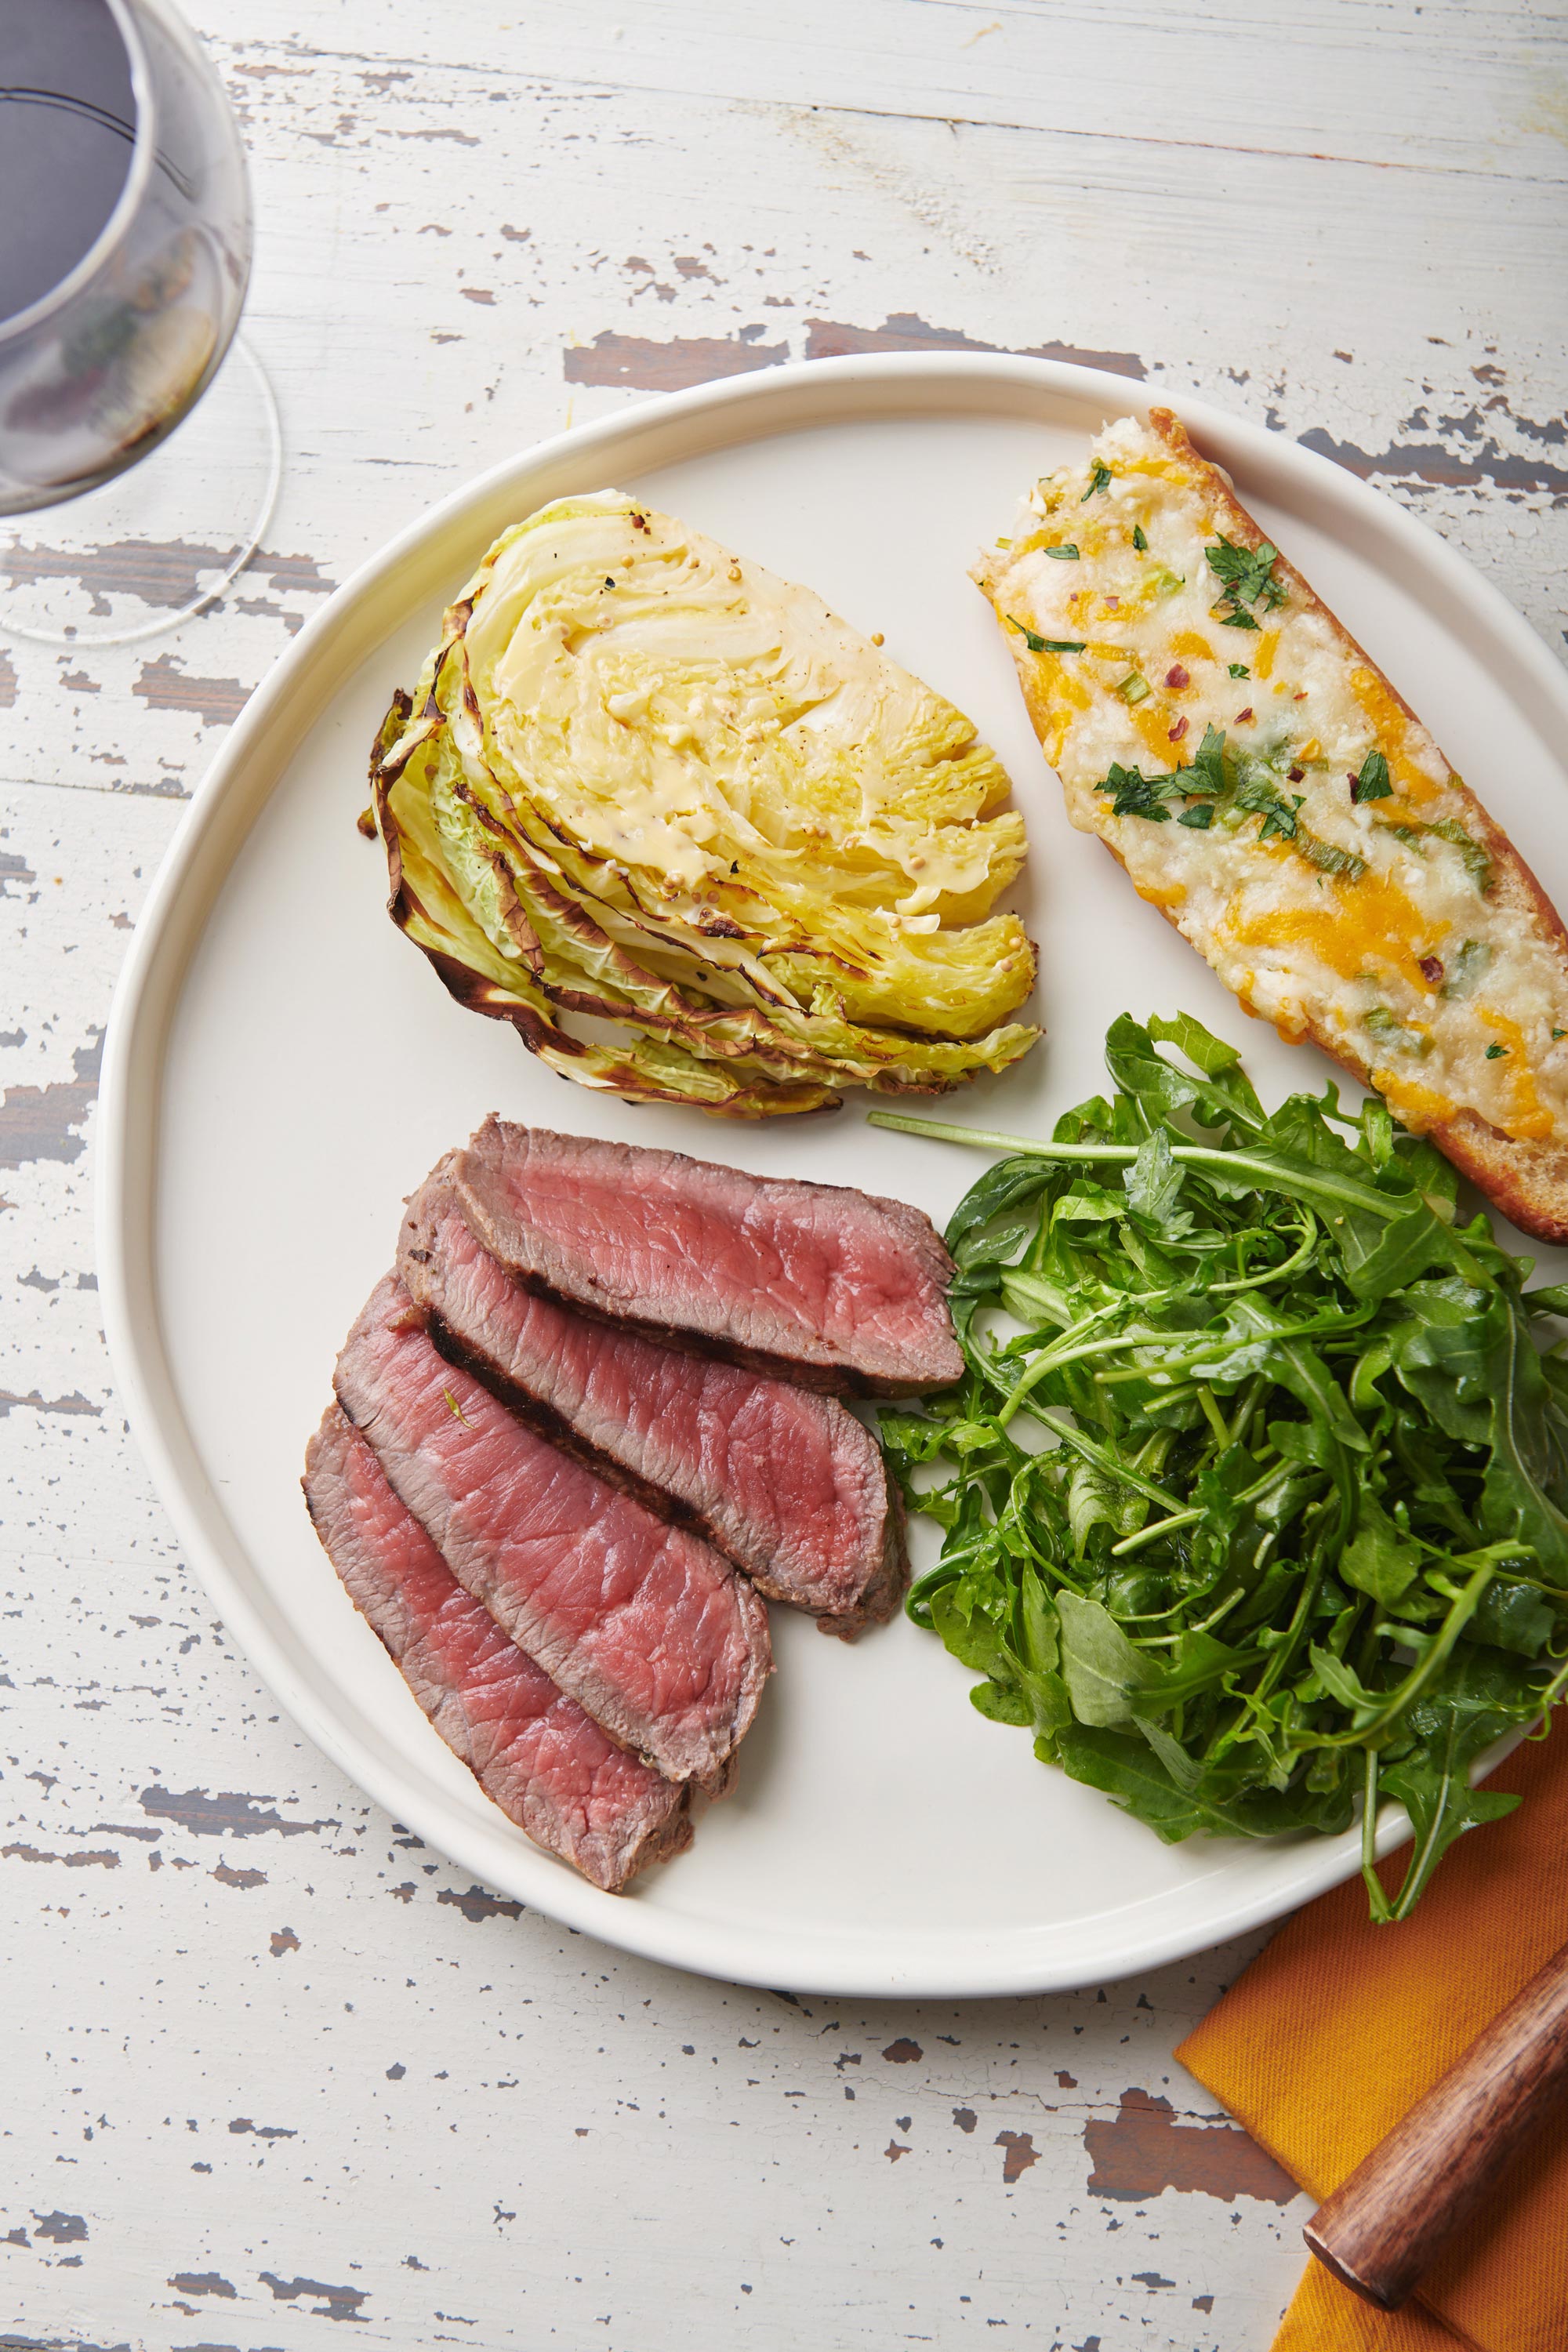 Slices of Mustard Marinated London Broil on a plate with greens and bread.